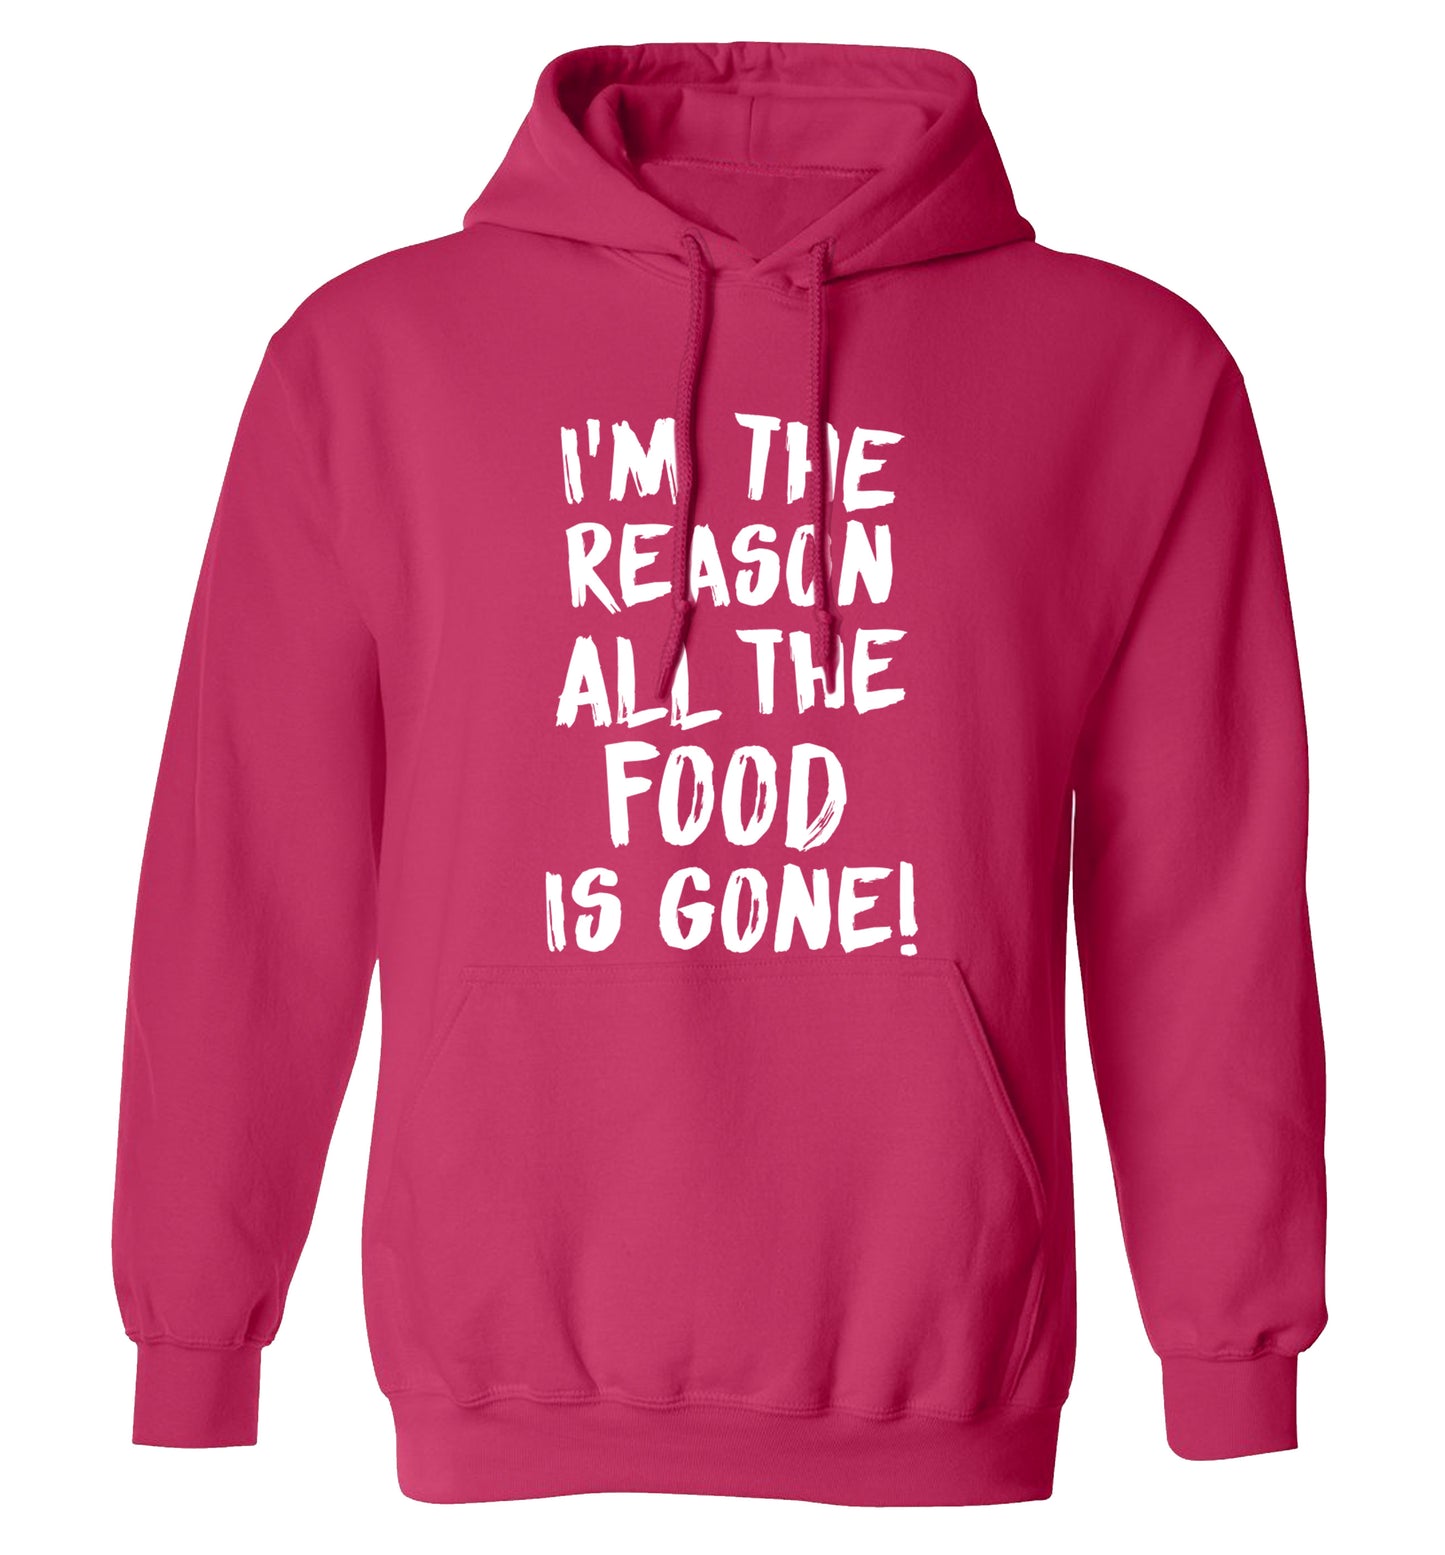 I'm the reason why all the food is gone adults unisex pink hoodie 2XL